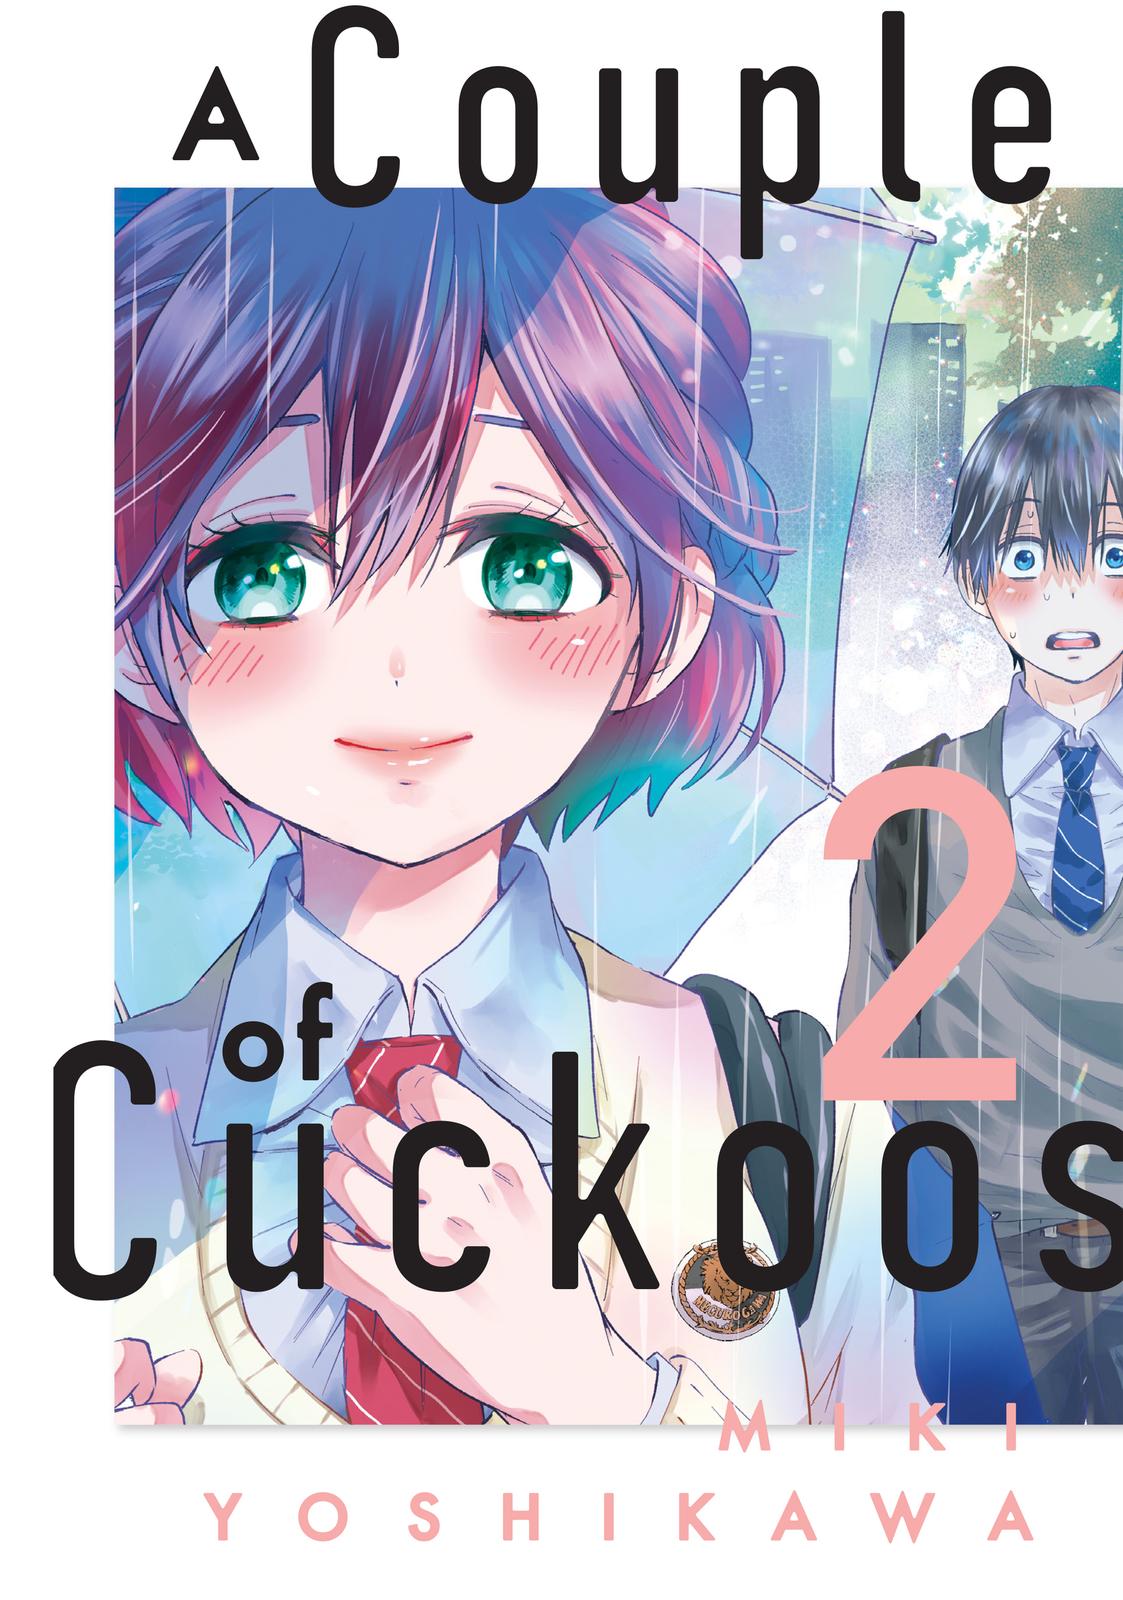 THIS ANIME JUST KEEPS GETTING WORSE?! - A Couple of Cuckoos